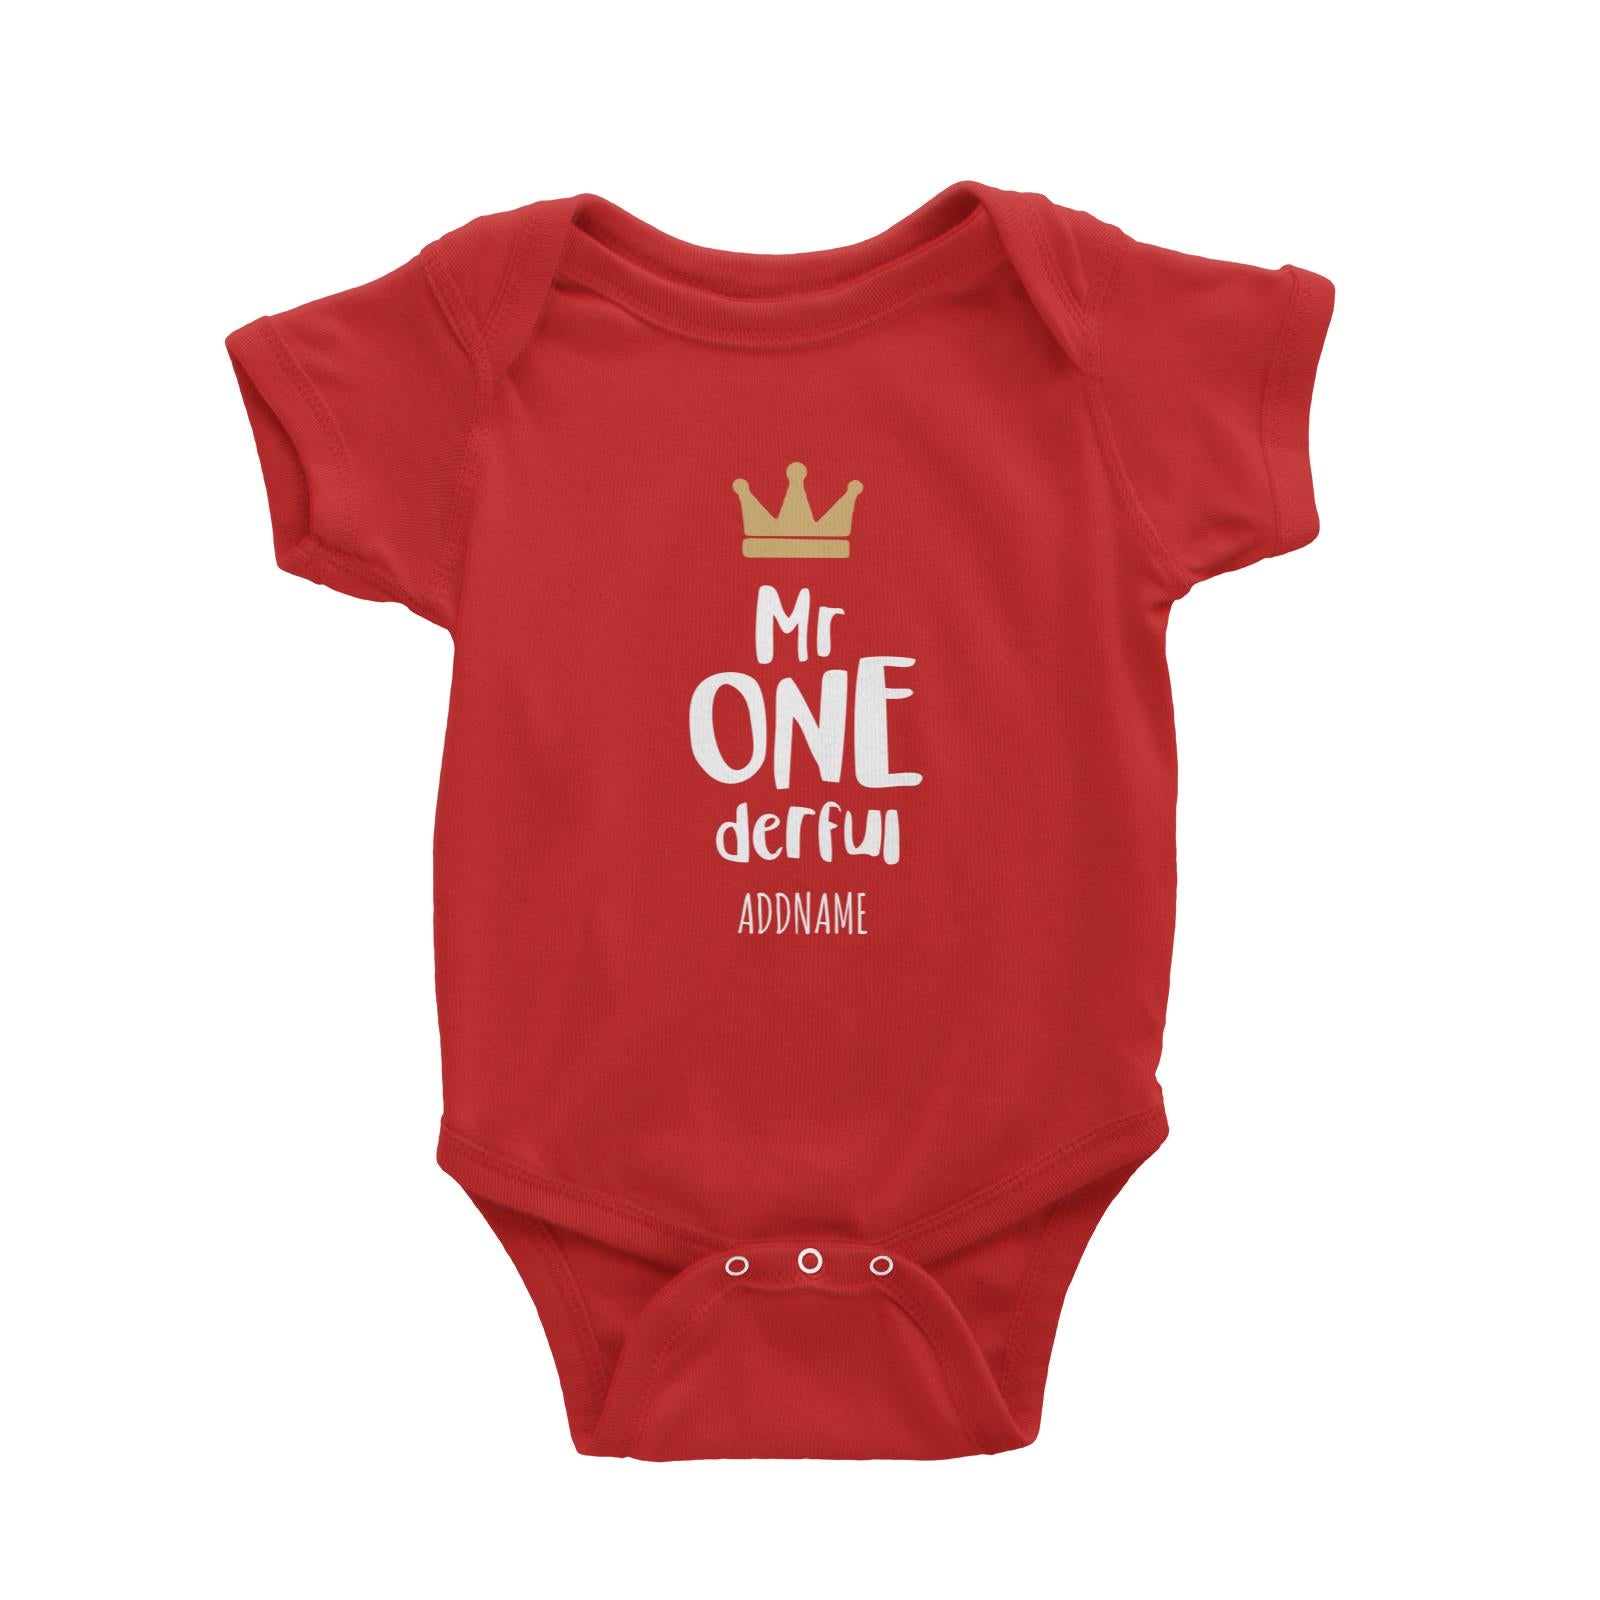 Mr One Derful with Crown Addname Baby Romper Personalizable Designs Basic Newborn